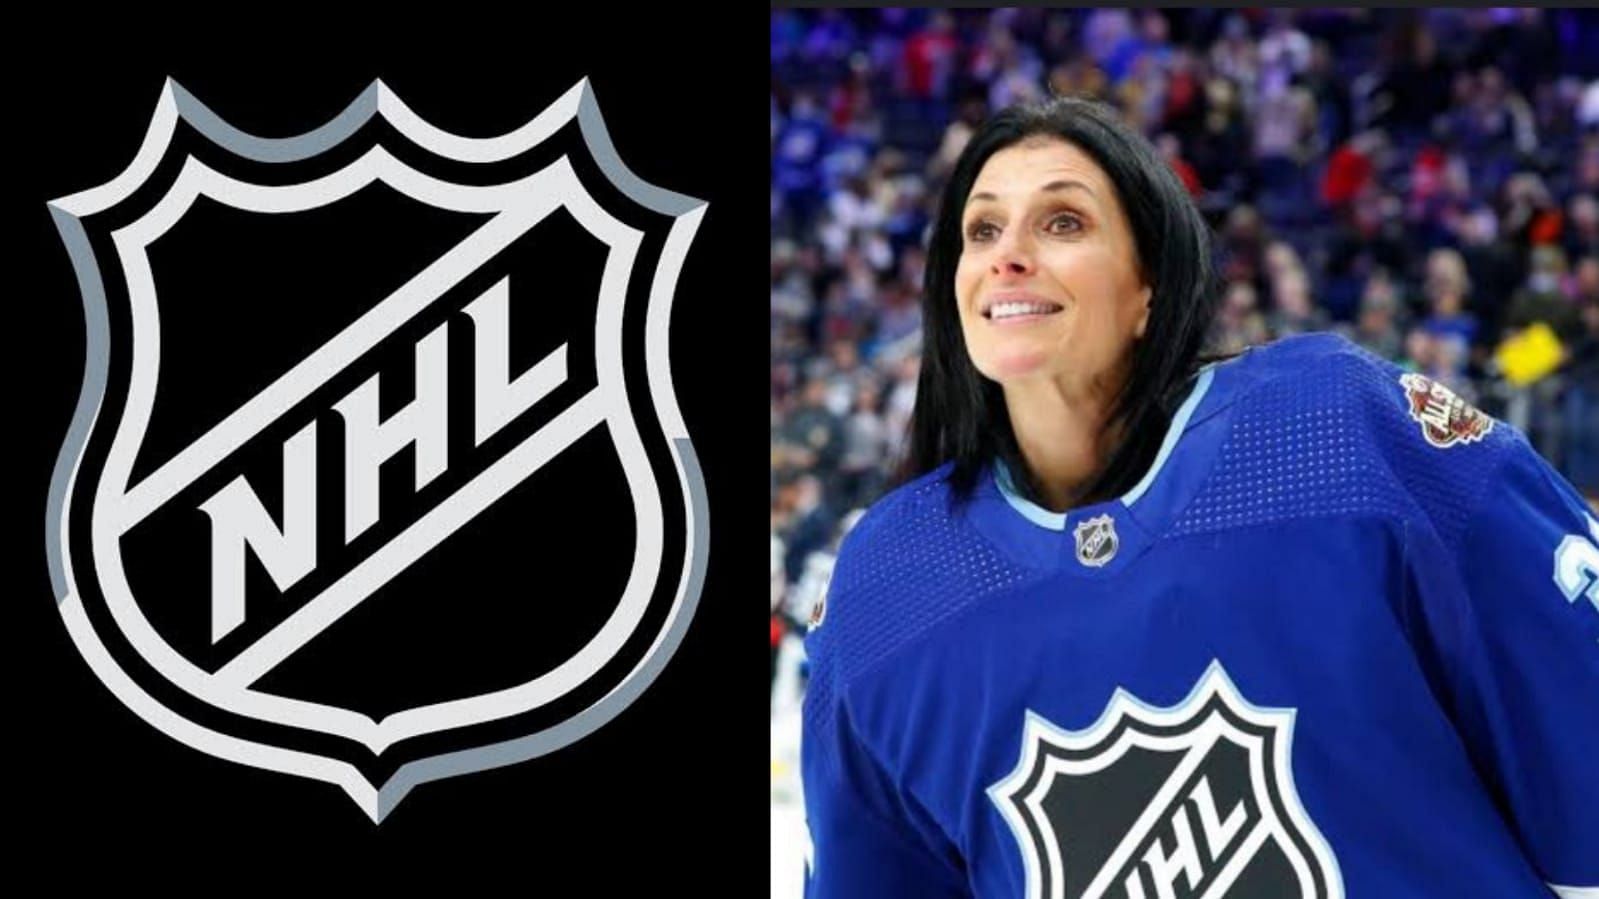 Manon Rheaume became the first woman to play an NHL game